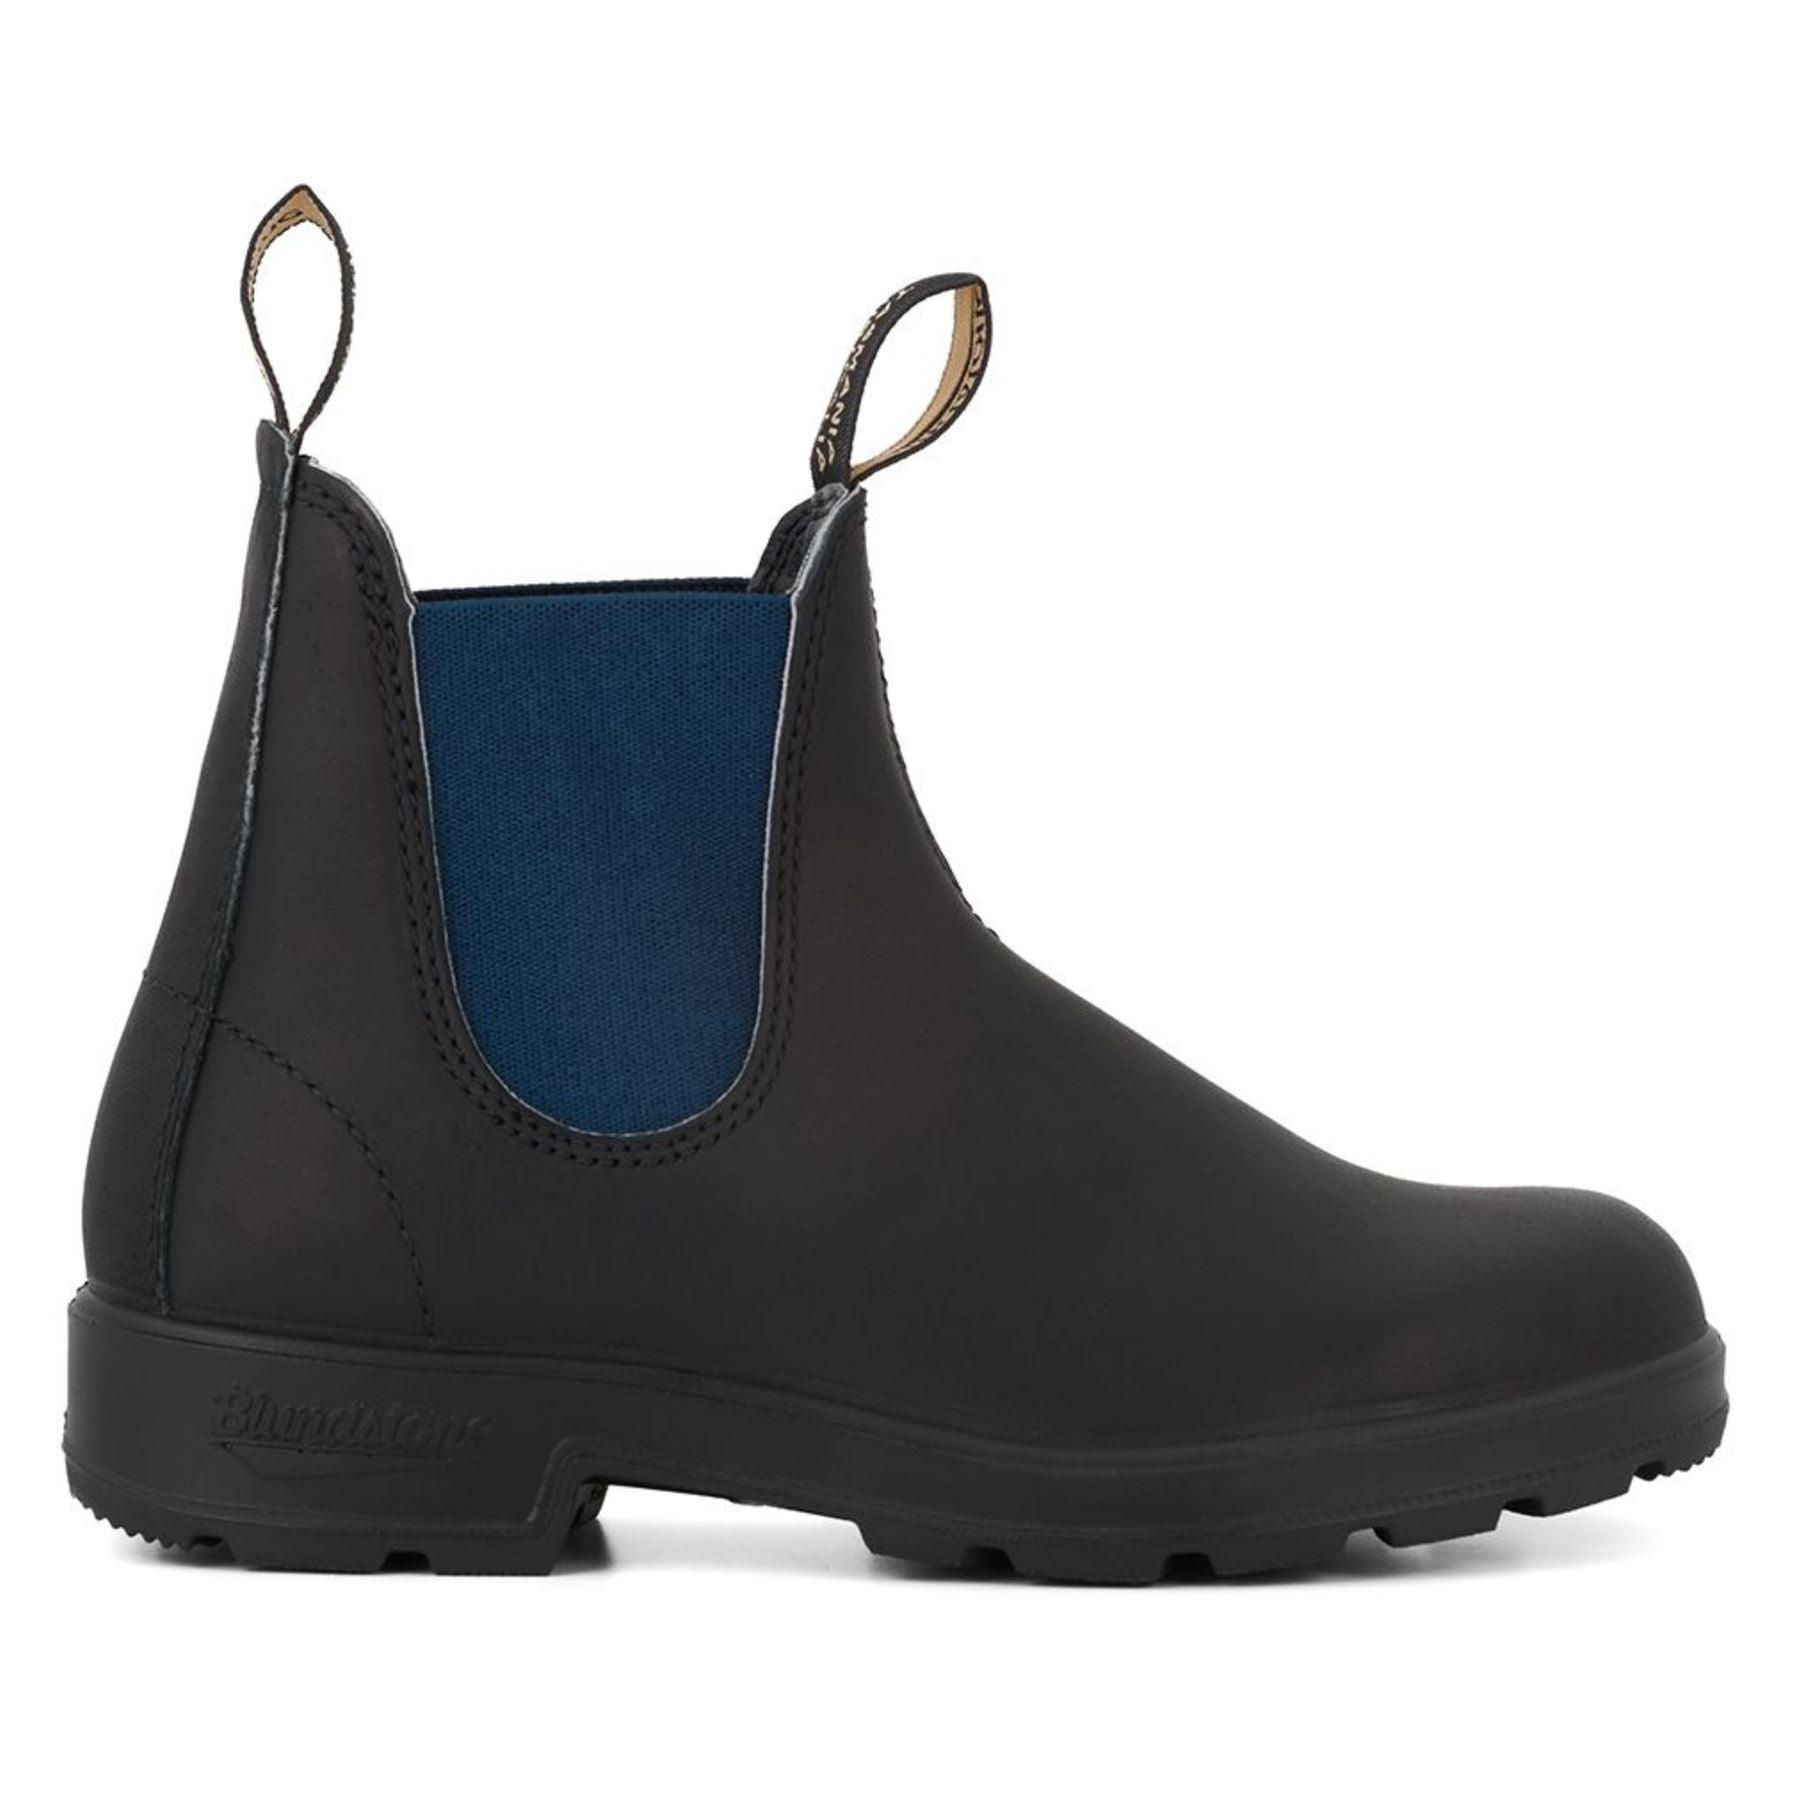 Blundstone 1917 Black Navy Blue Leather Chelsea Boots Ankle Classic Slip On - Knighthood Store